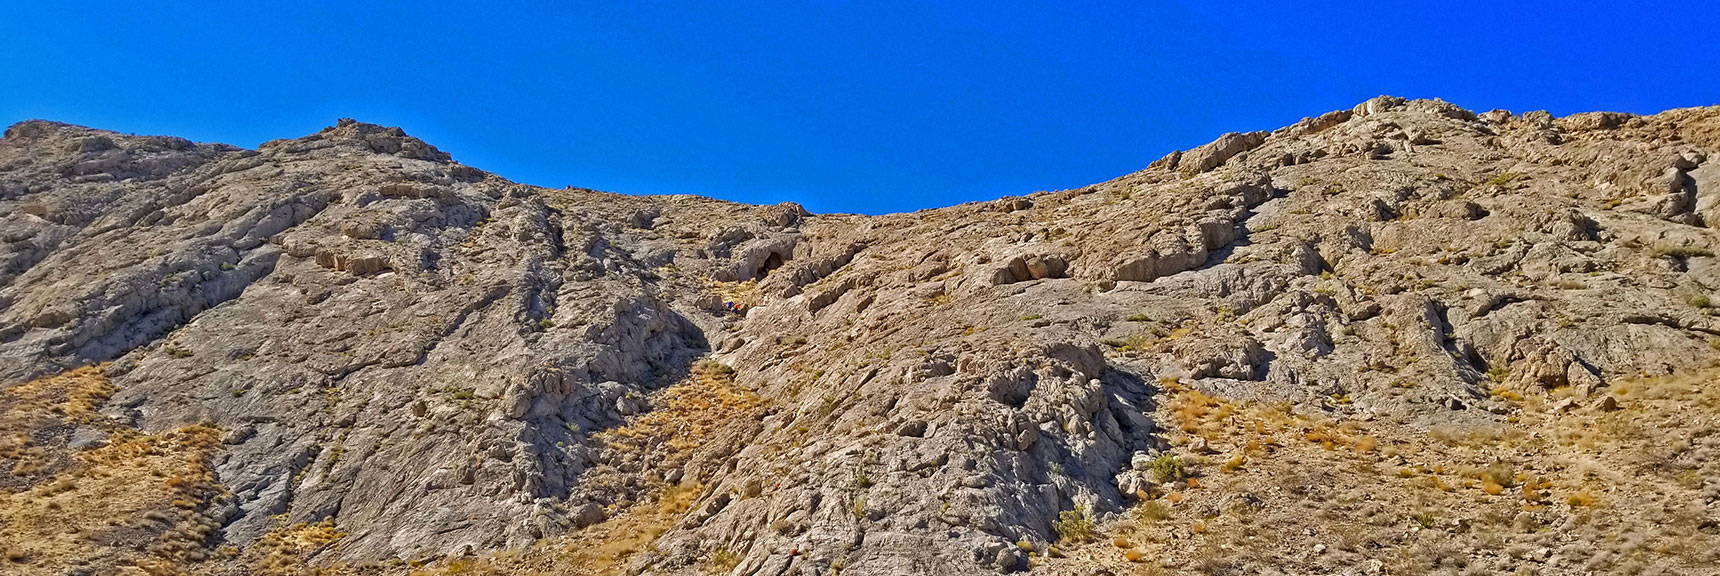 Class 3 Gully Summit Route on the Northeastern Side of Lone Mountain | Lone Mountain | Las Vegas, Nevada